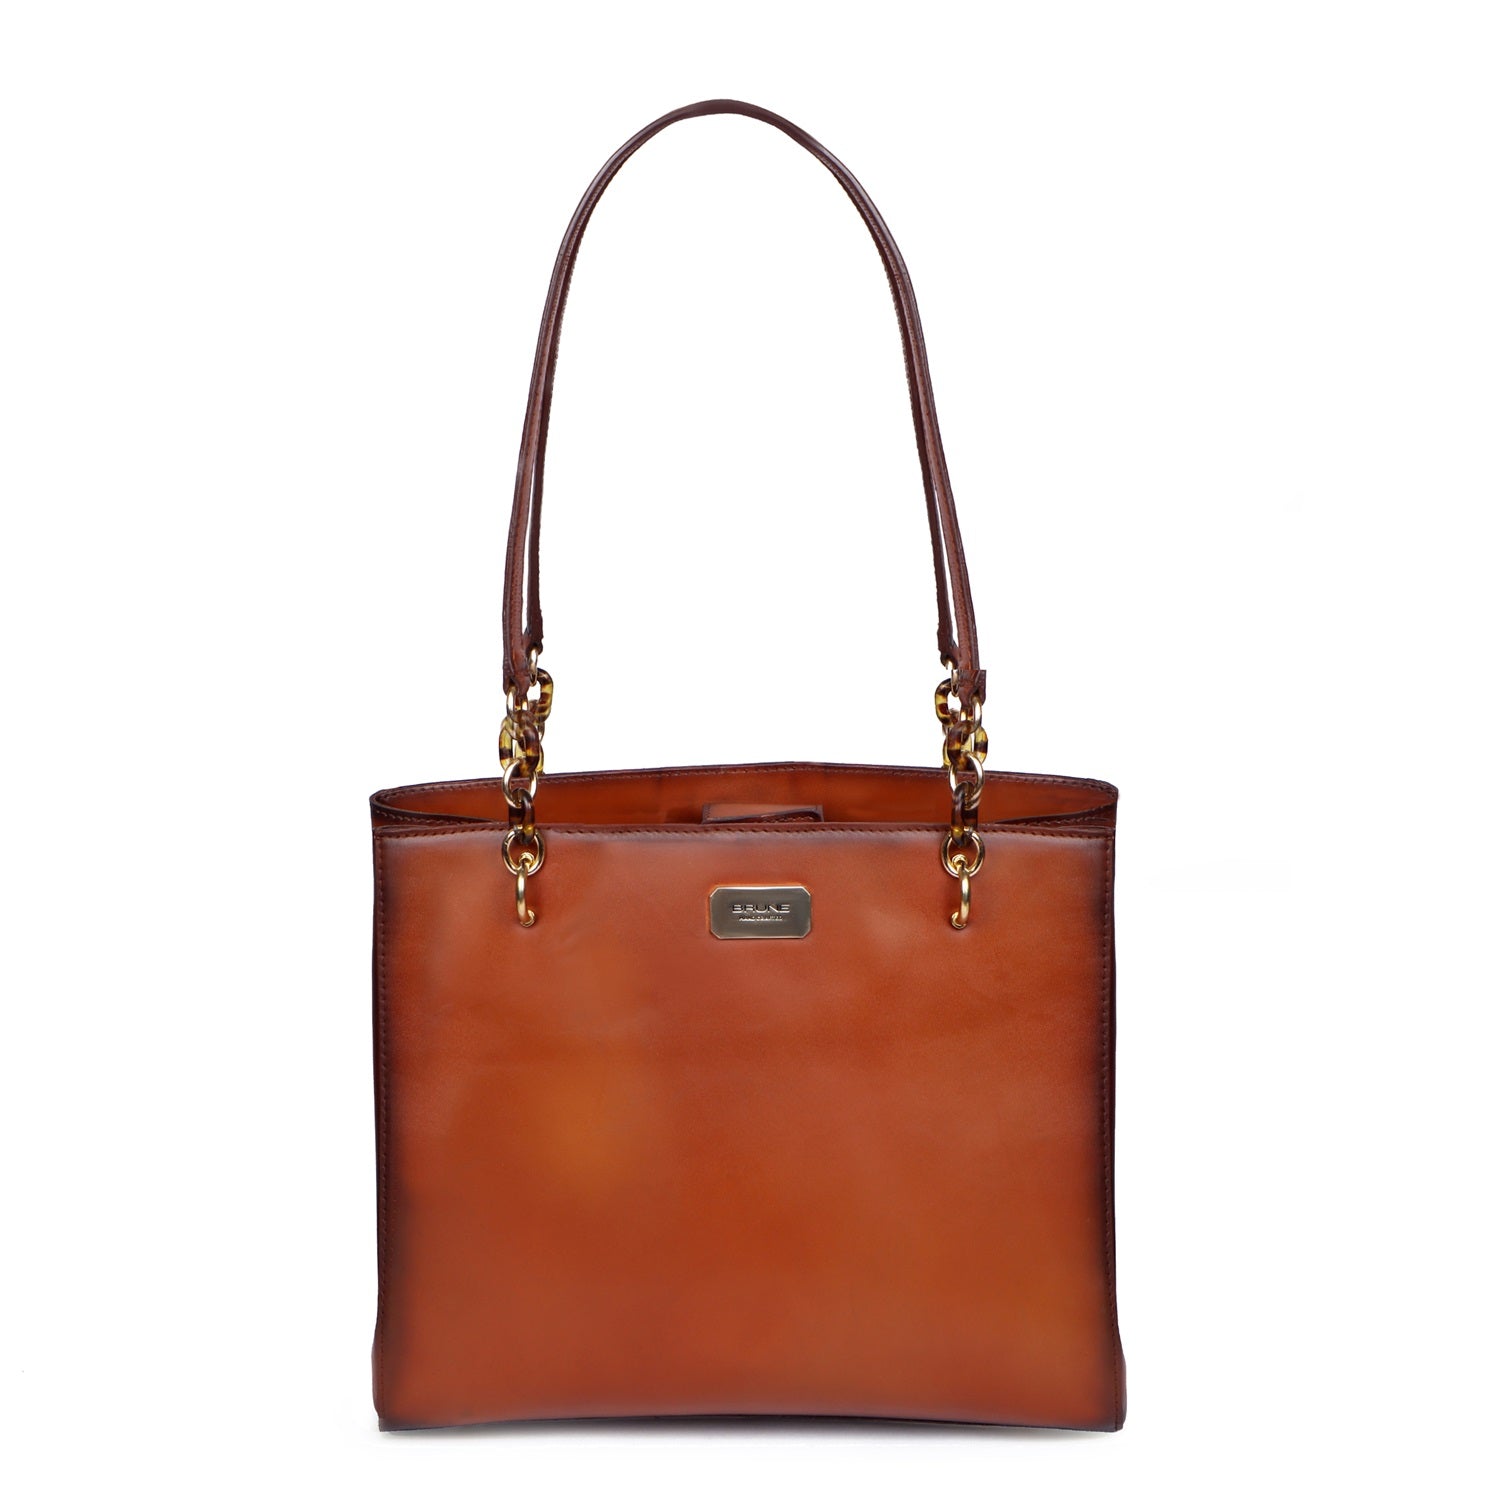 Tan Leather Hand Bag for Ladies with Button Closure